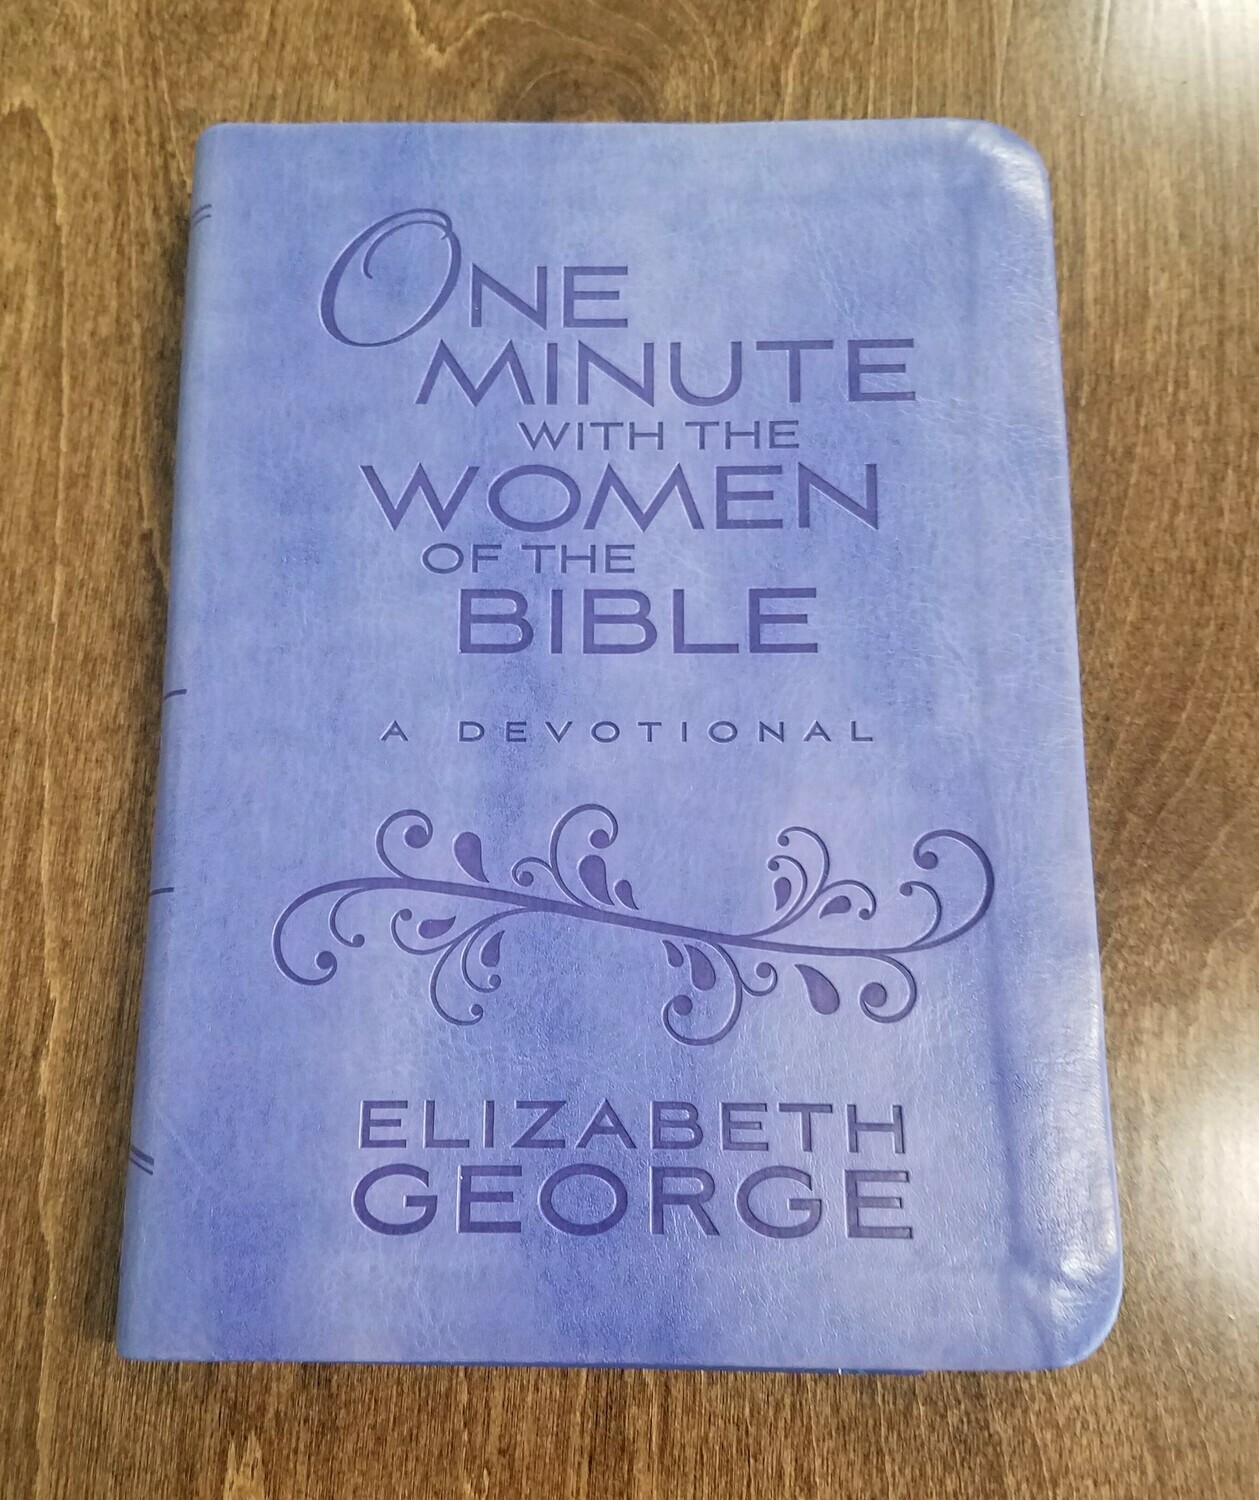 One Minute with the Women of the Bible by Elizabeth George